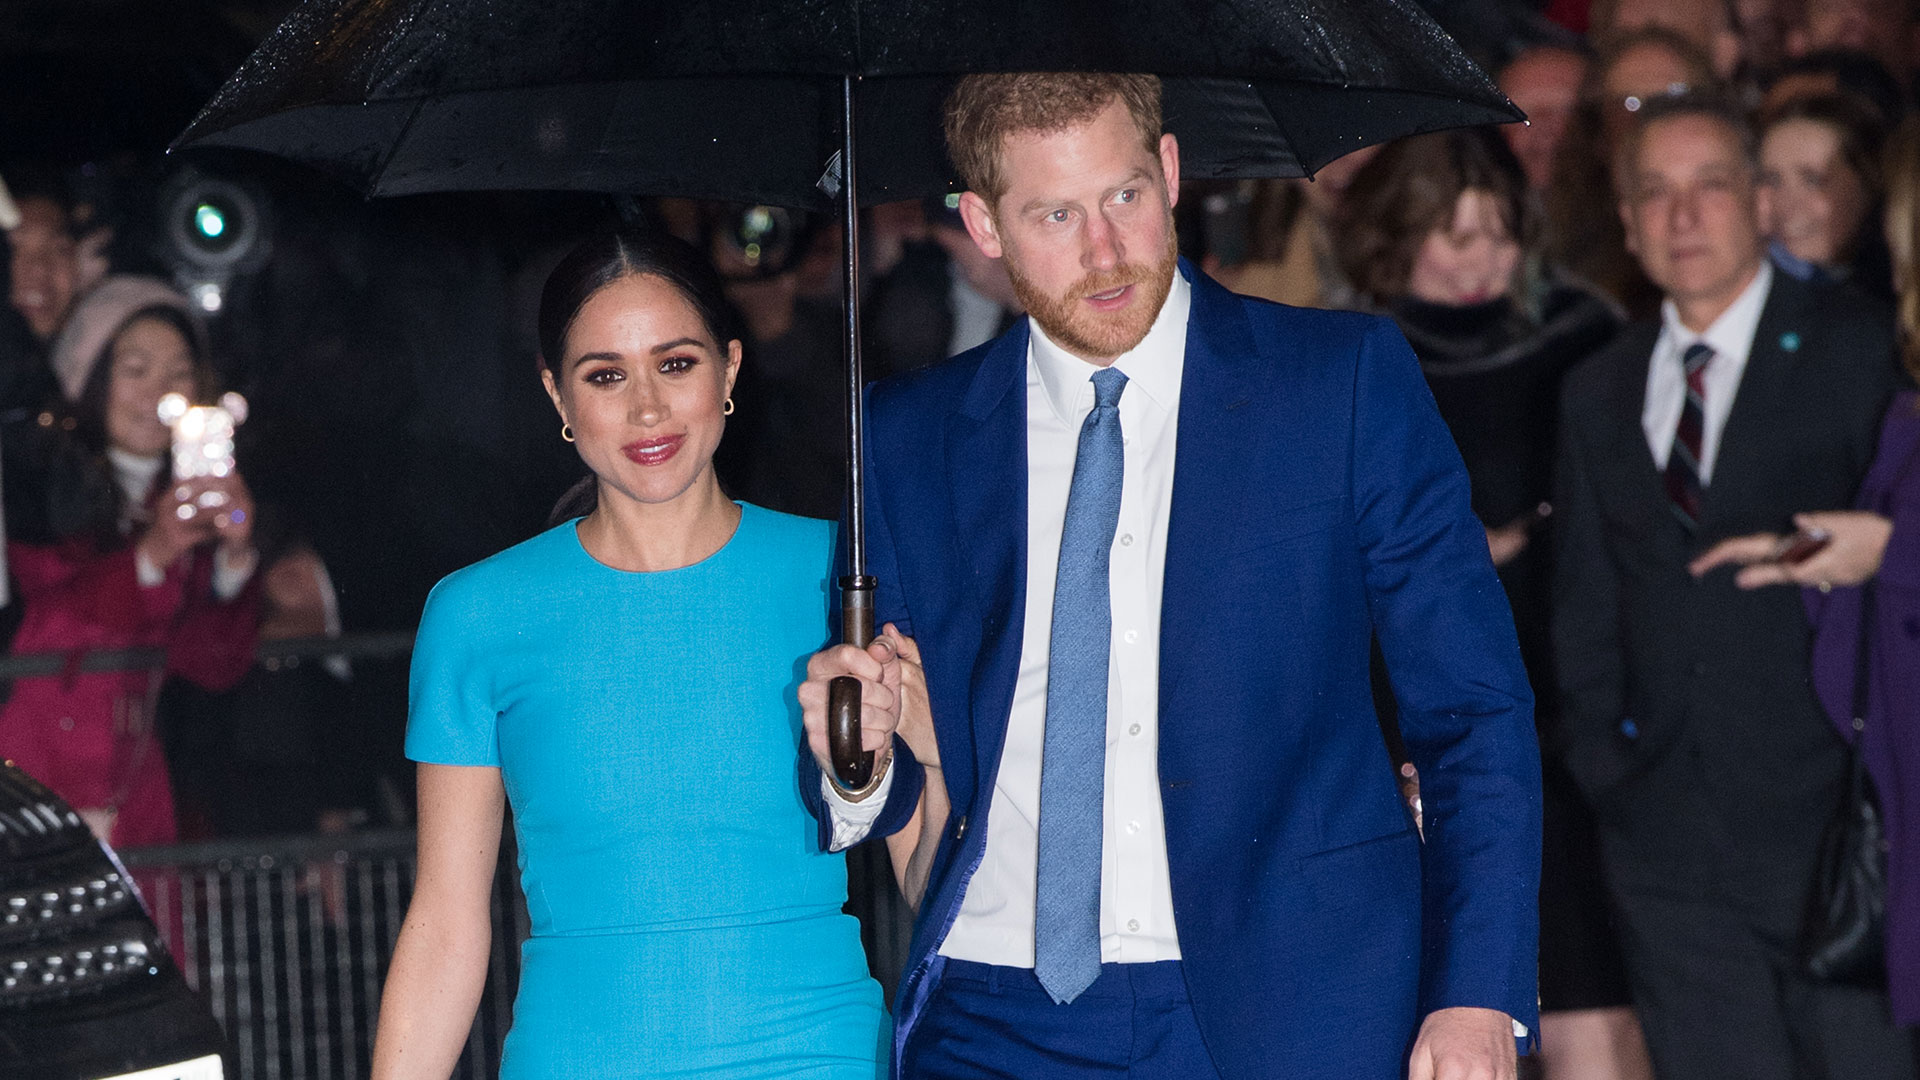 Harry And Meghan Booed During Public Appearance In London